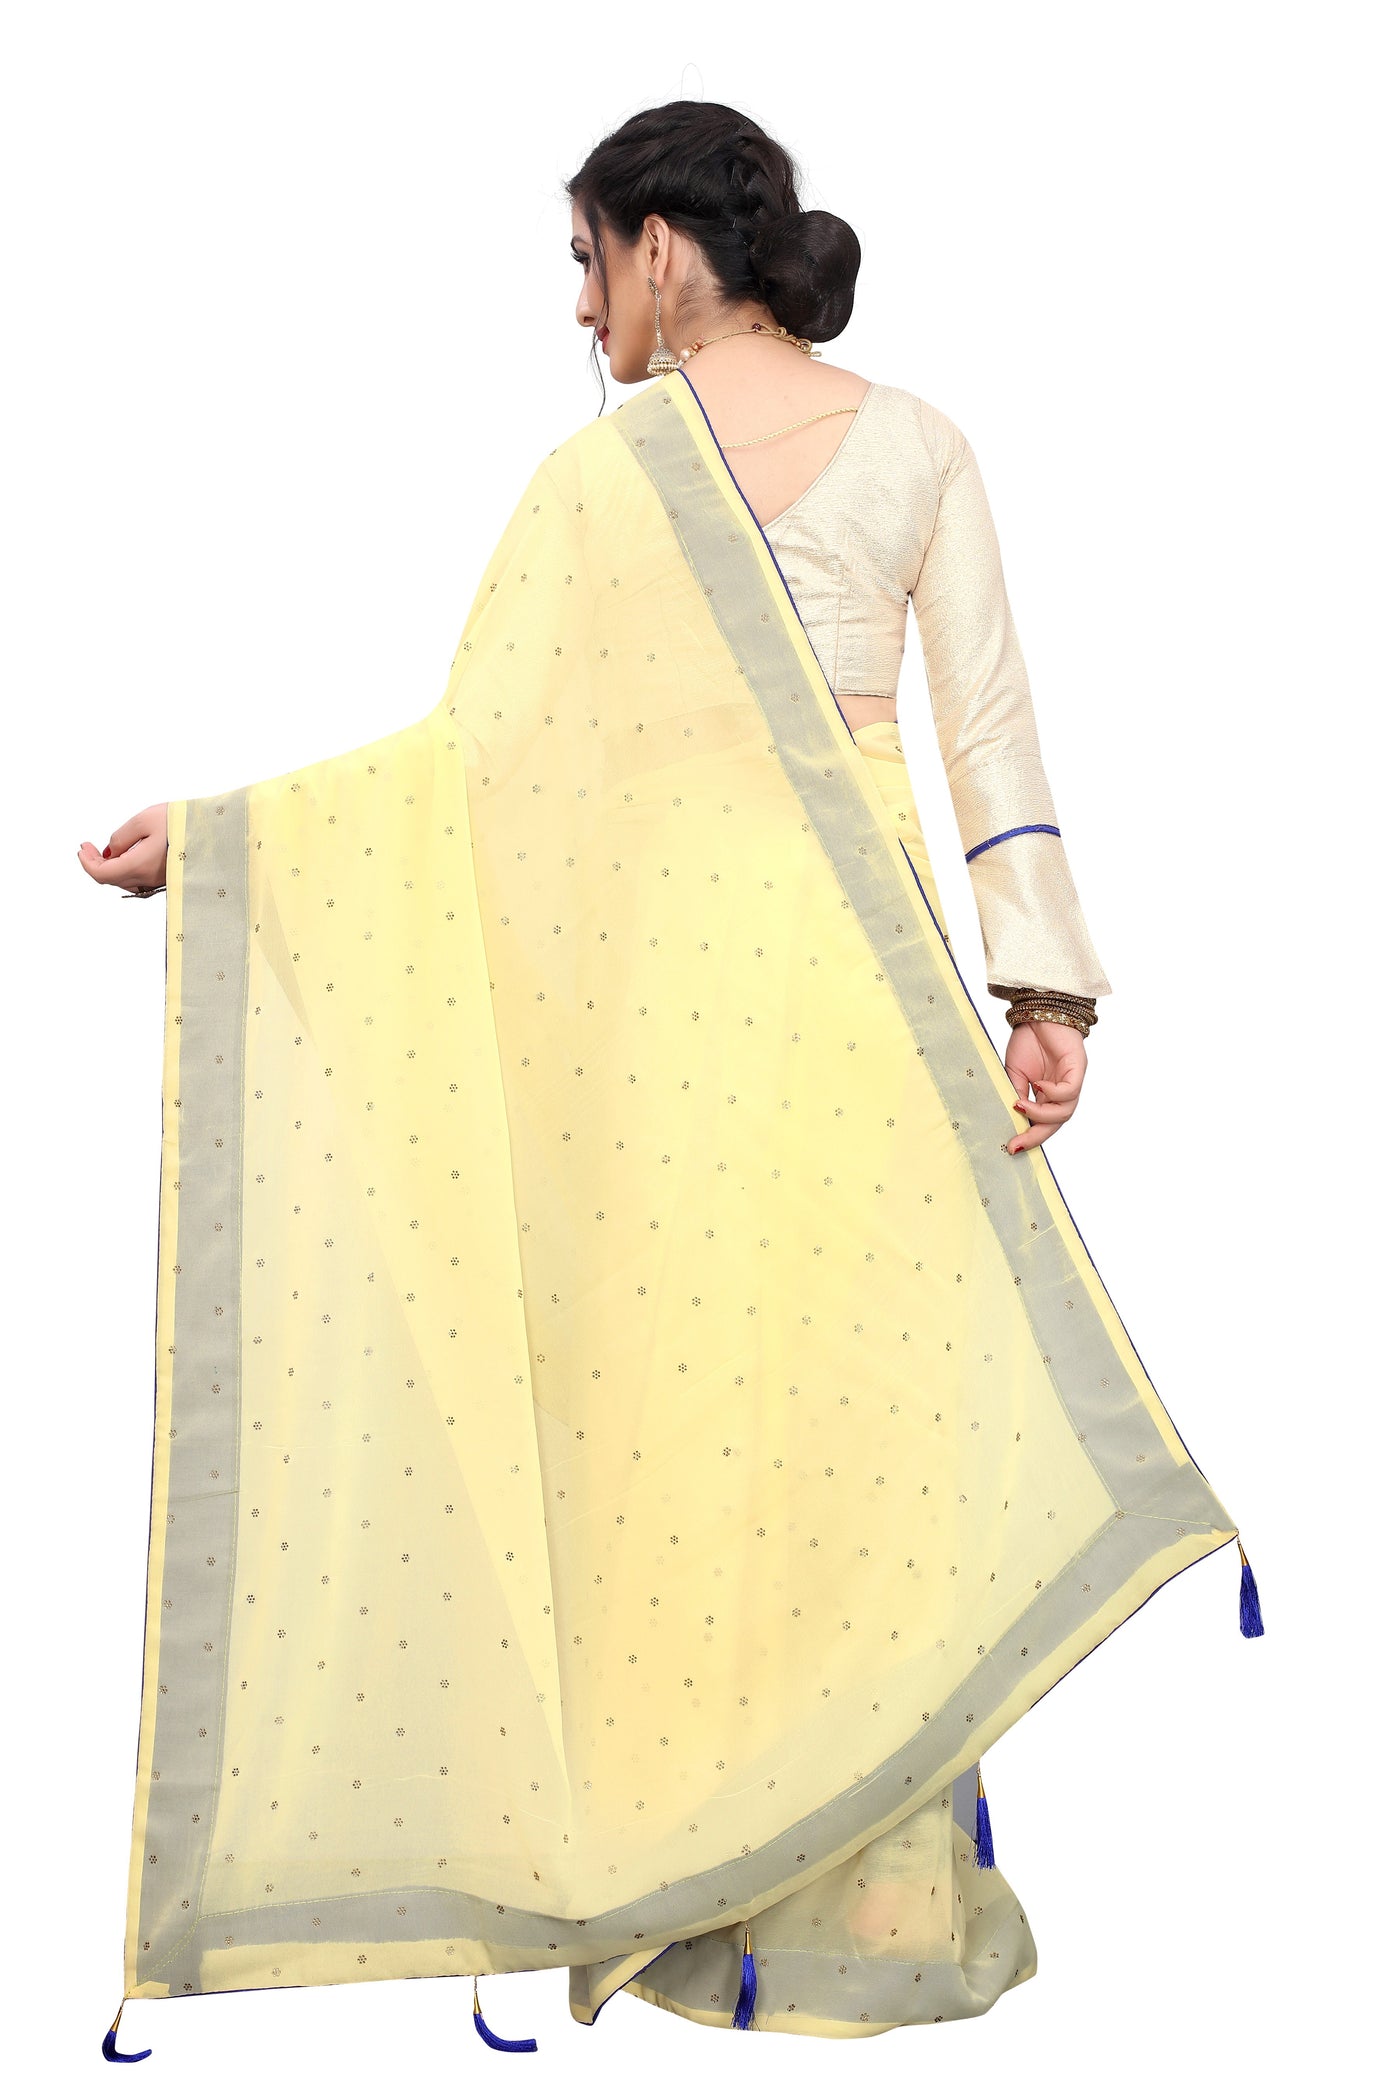 Georgette Yellow Saree With Blouse